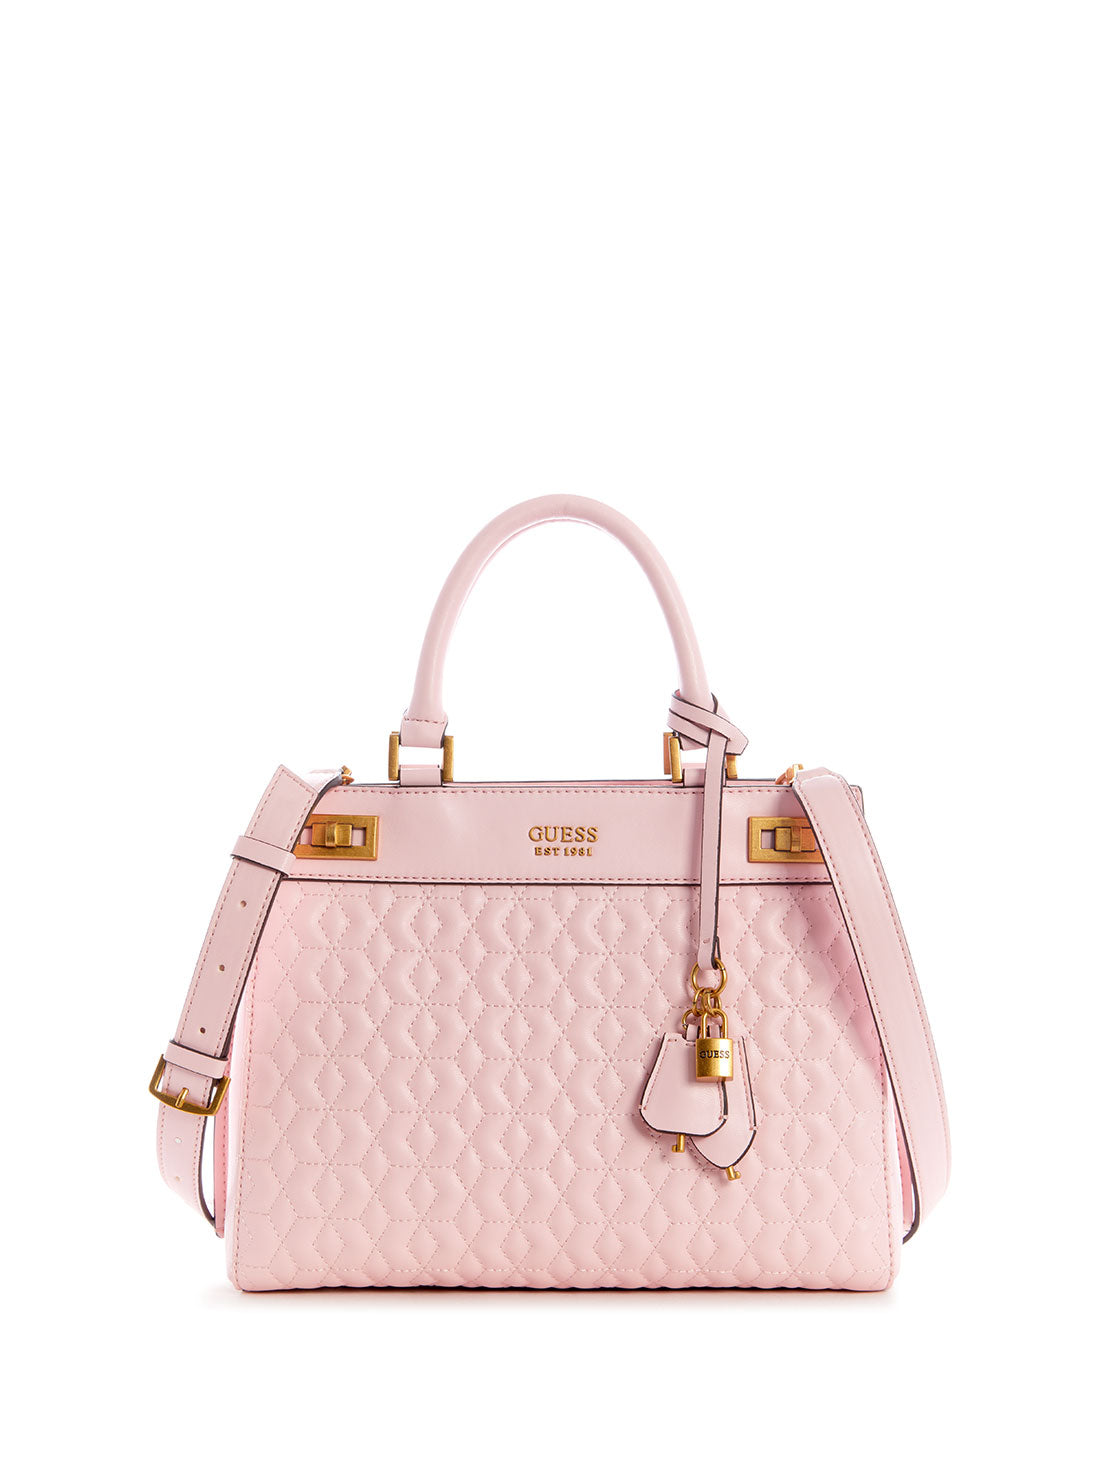 GUESS Women's Pink Katey Luxury Satchel Bag DB787026 Front View